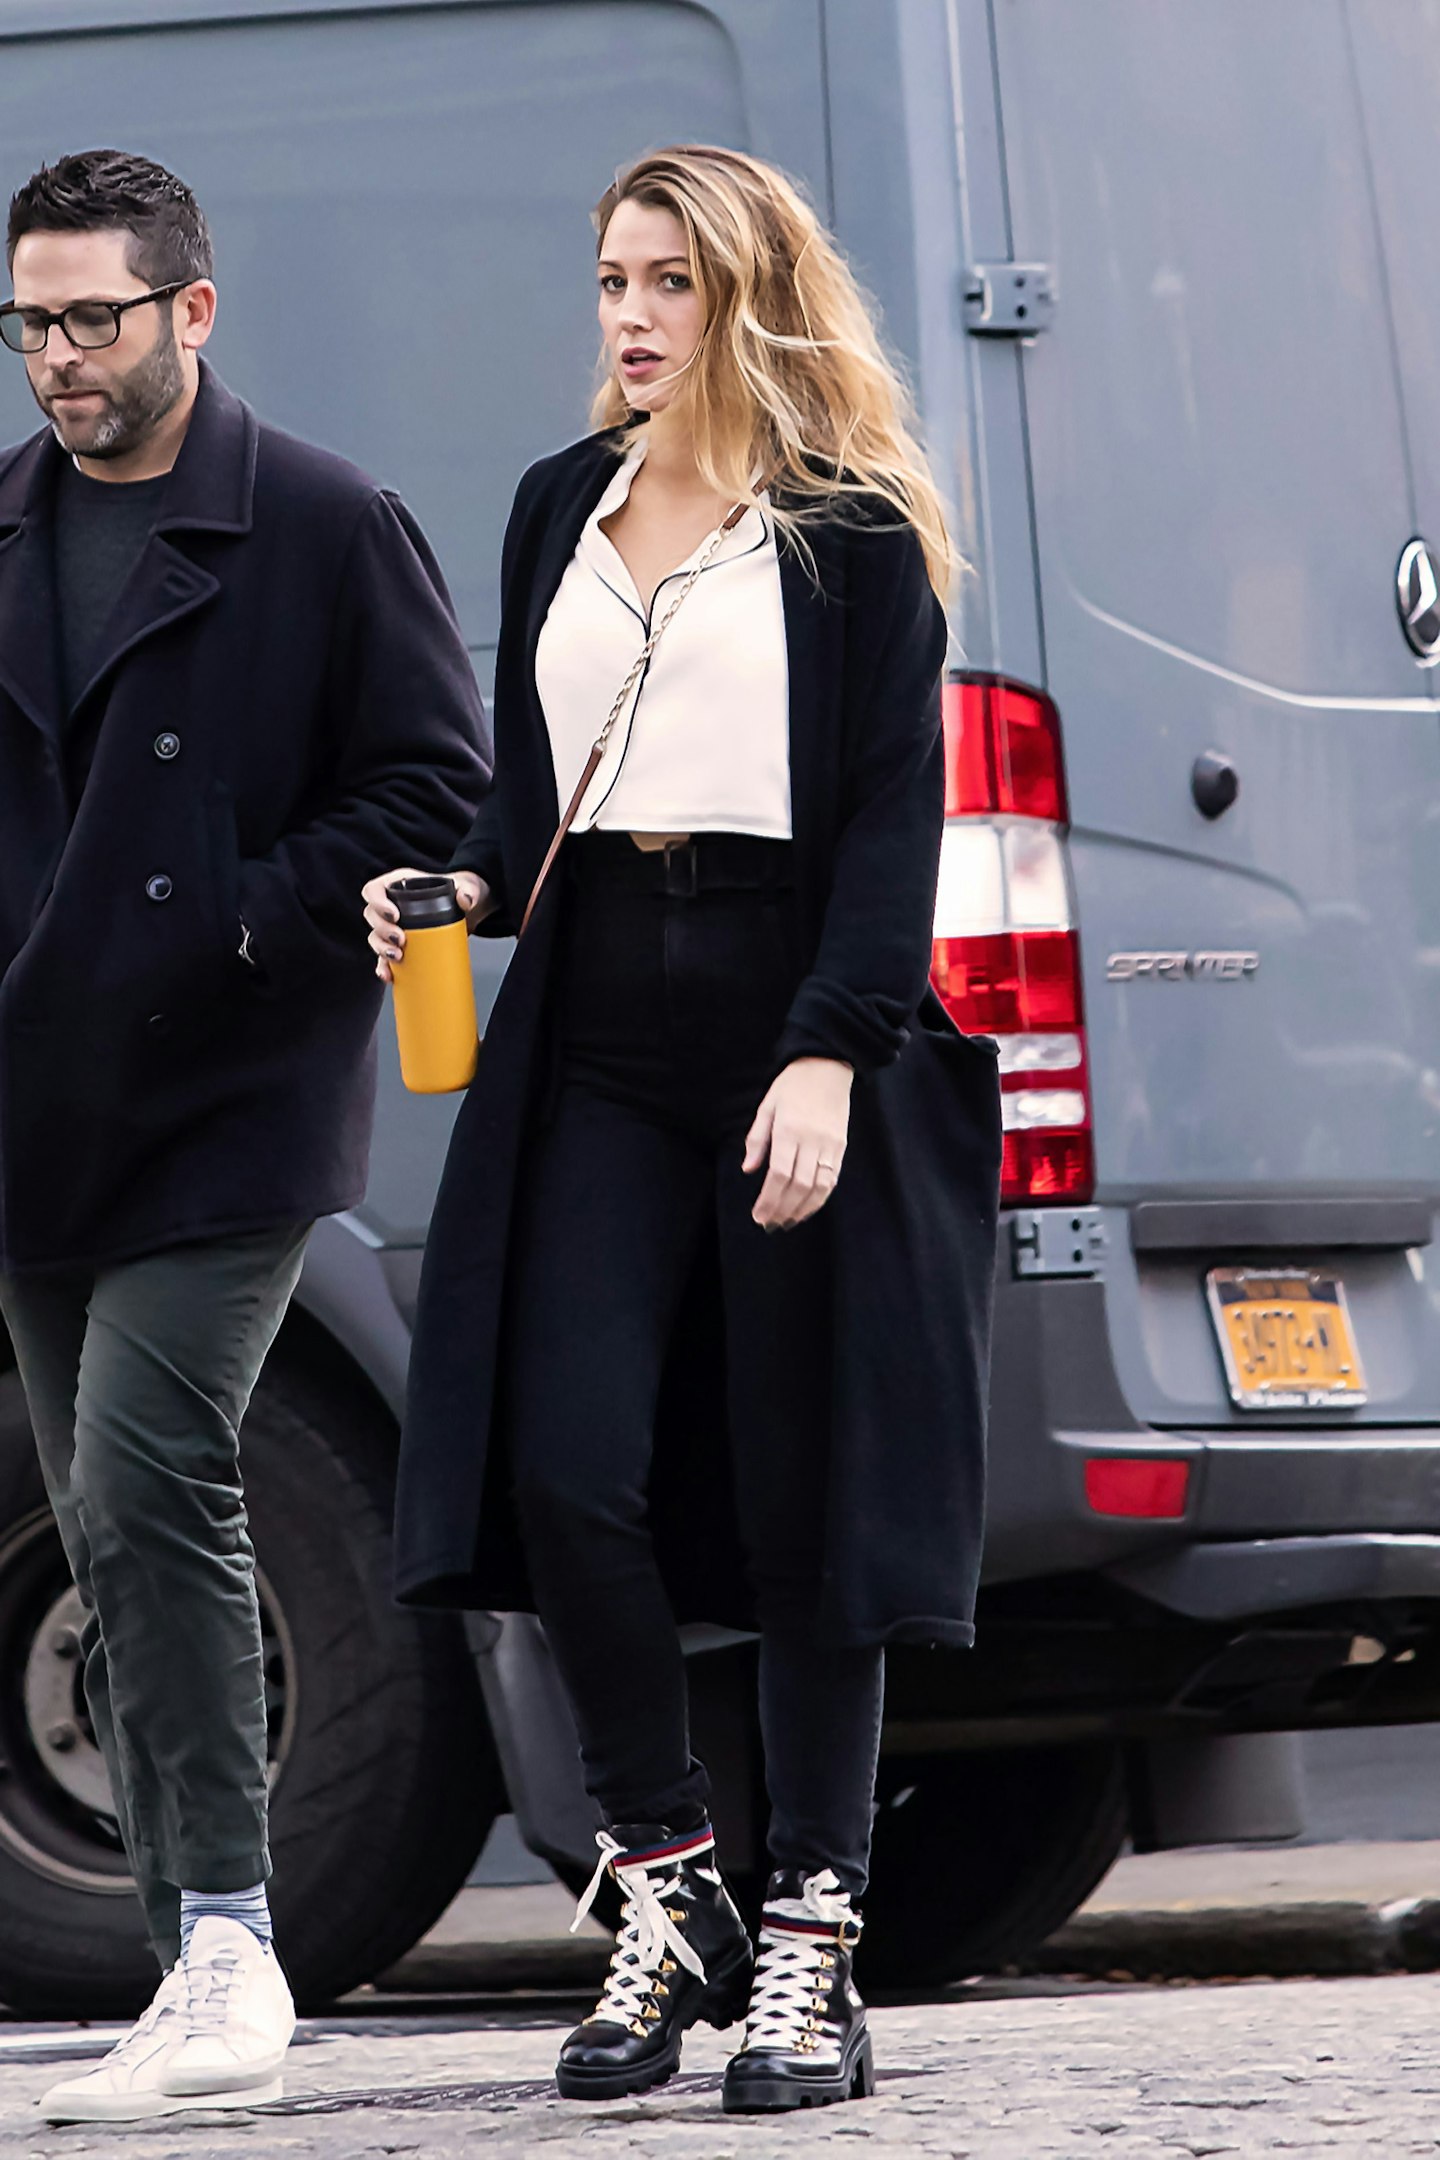 Blake Lively wearing jeans from Reformation